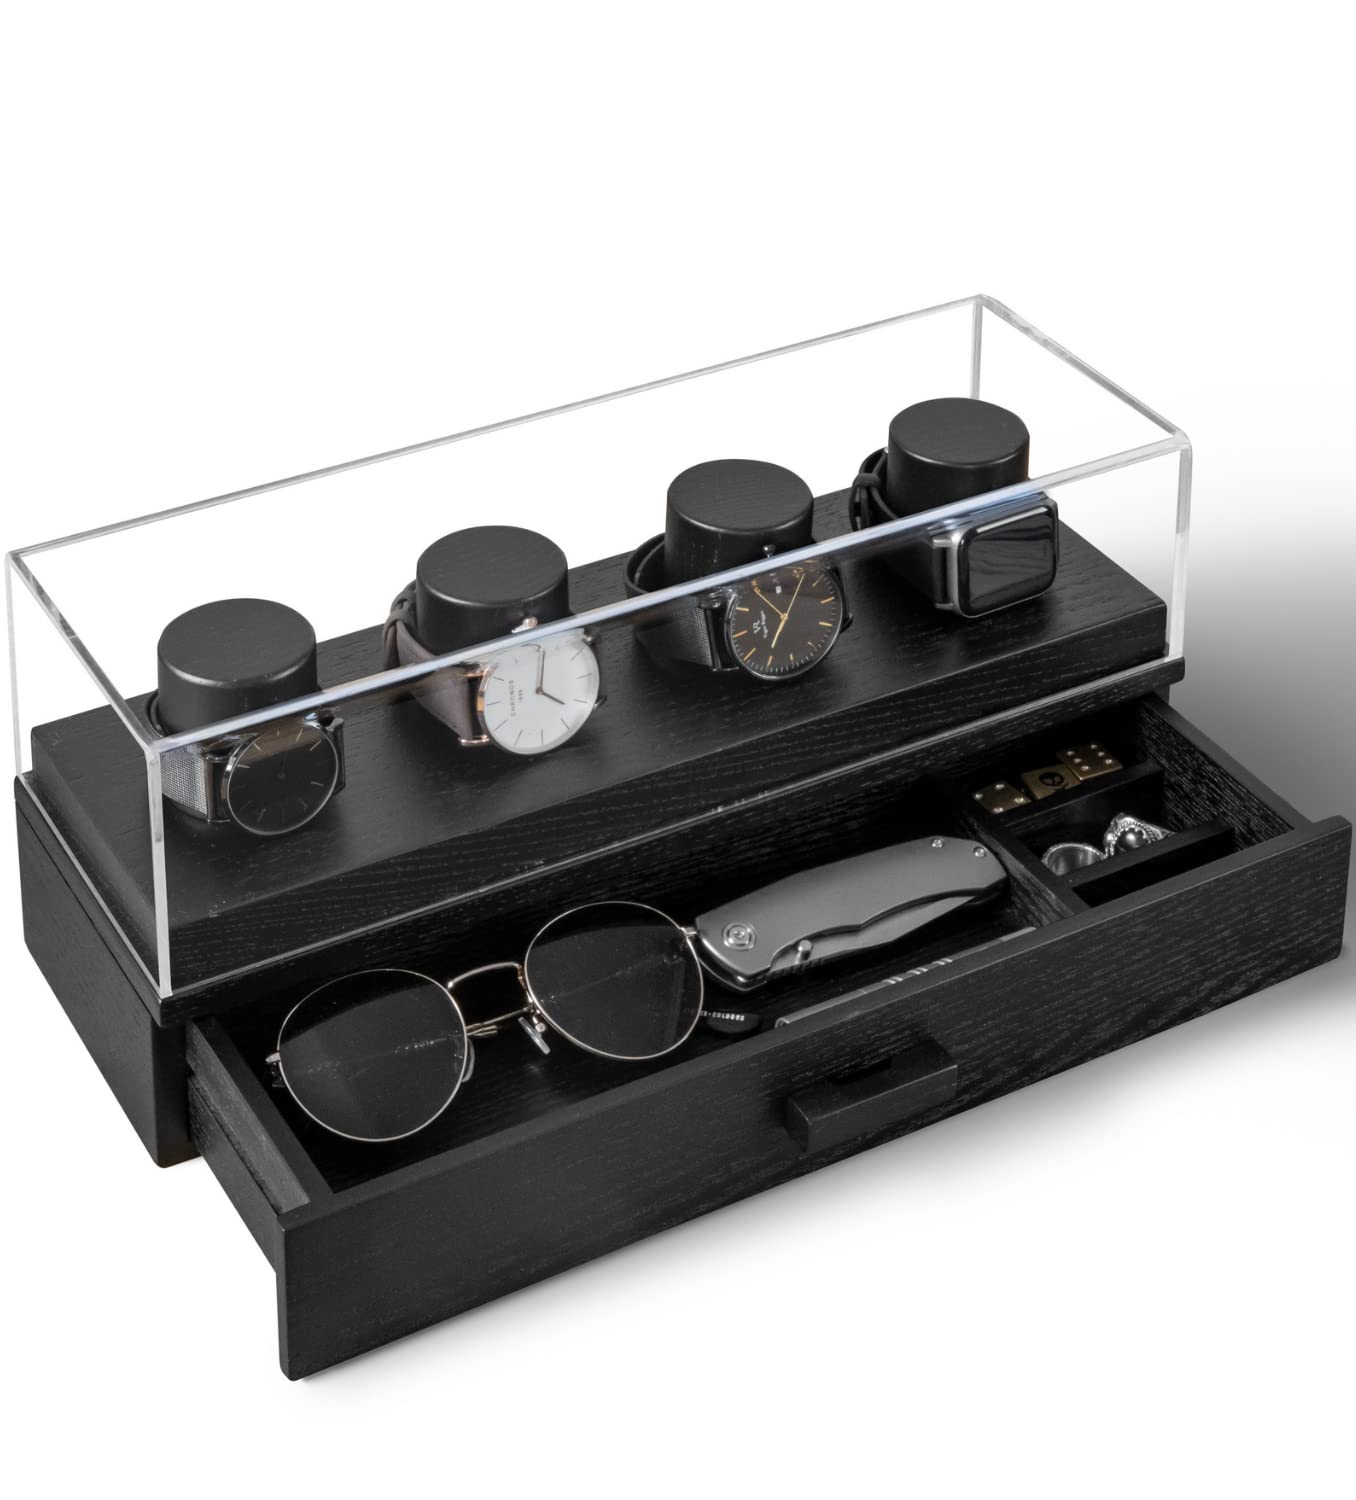 Watch Display Case with Black Vegan Leather Padding for Protection - Sleek Black Wood Watch Holder to Show Off Watches - Watch Box for Men - Watch Display Case for Men - Mens Watch Case